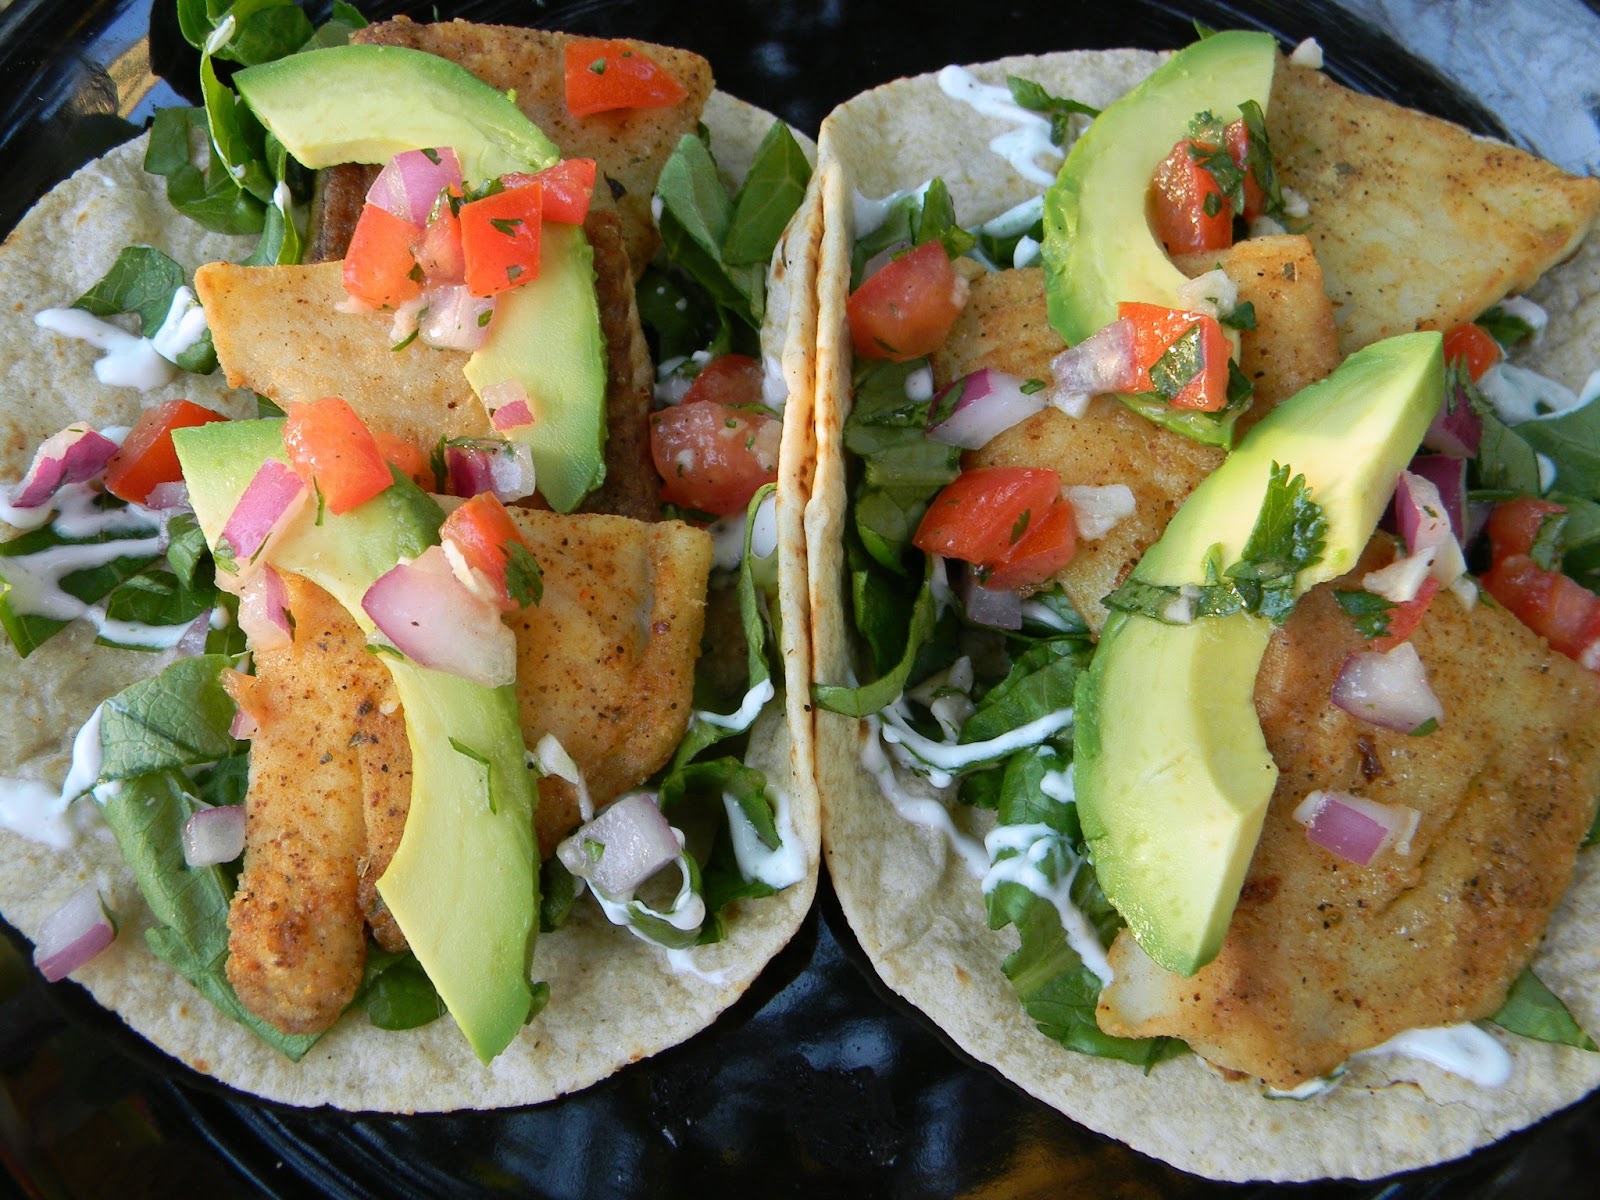 Kitten with a Whisk: Blackened Fish Tacos